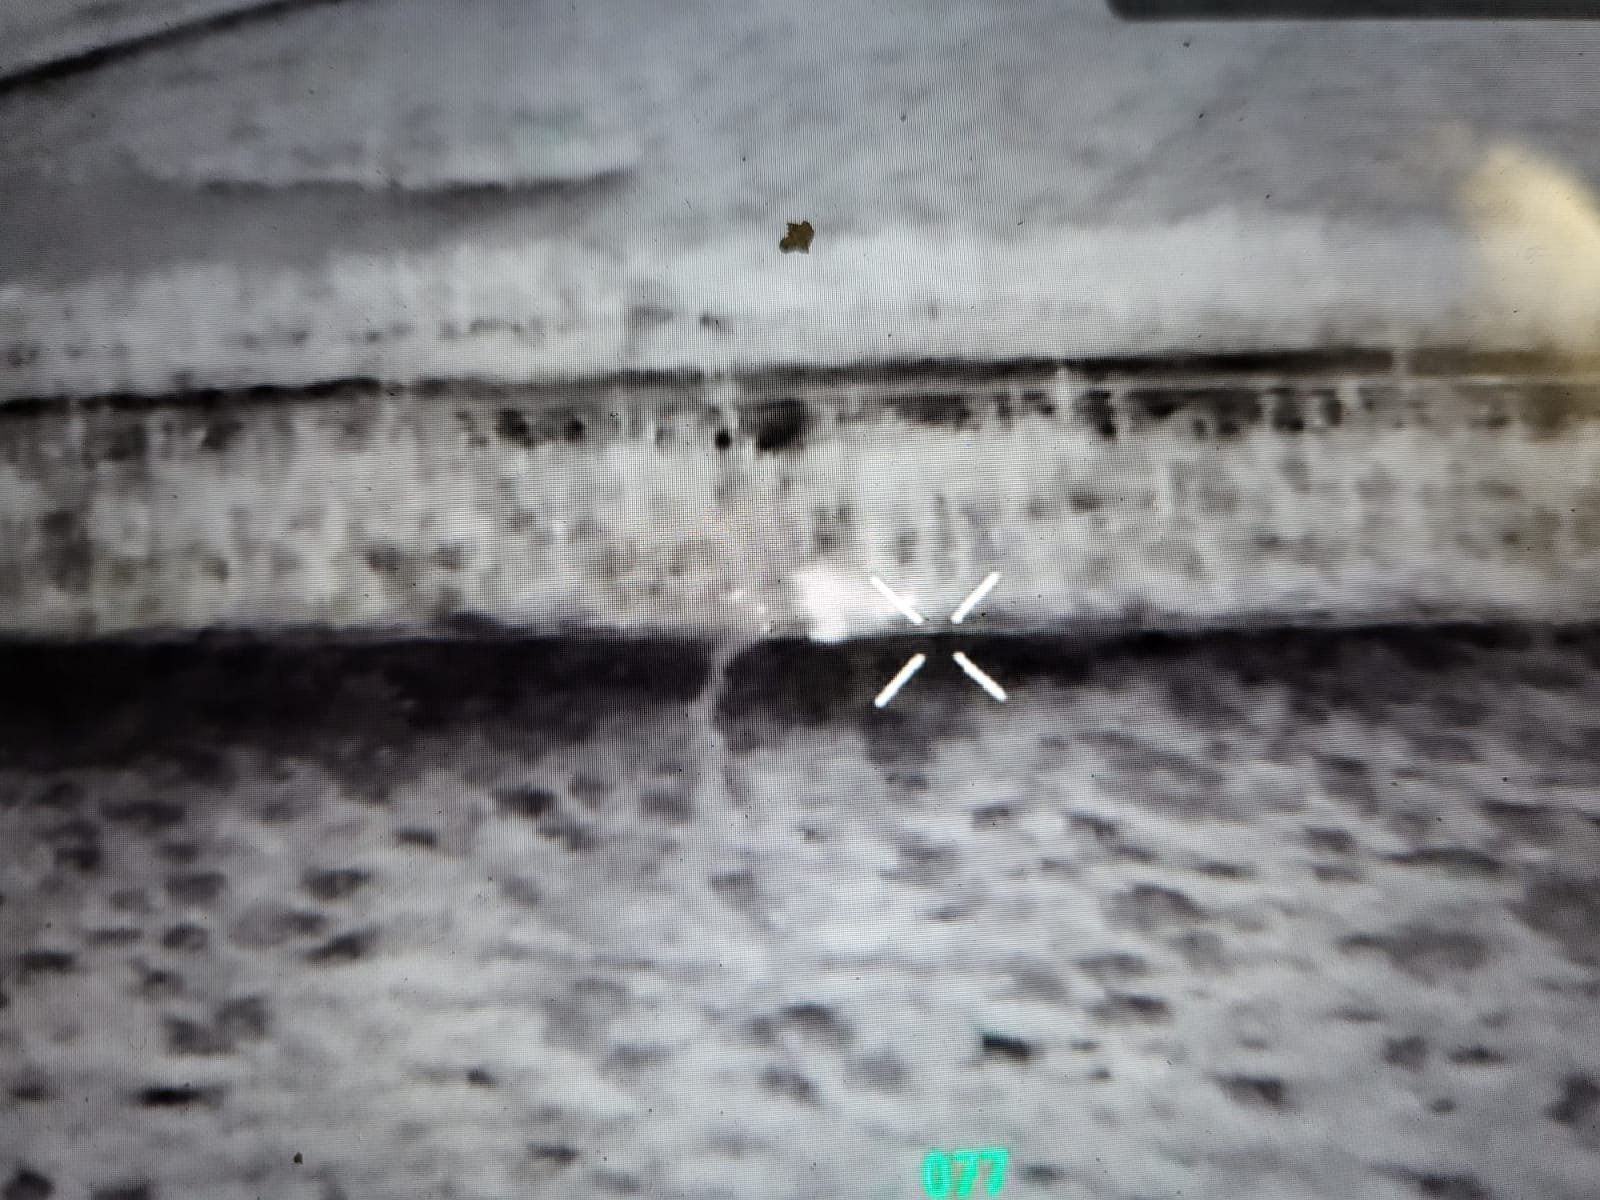 The drone’s camera captures enemy soldiers